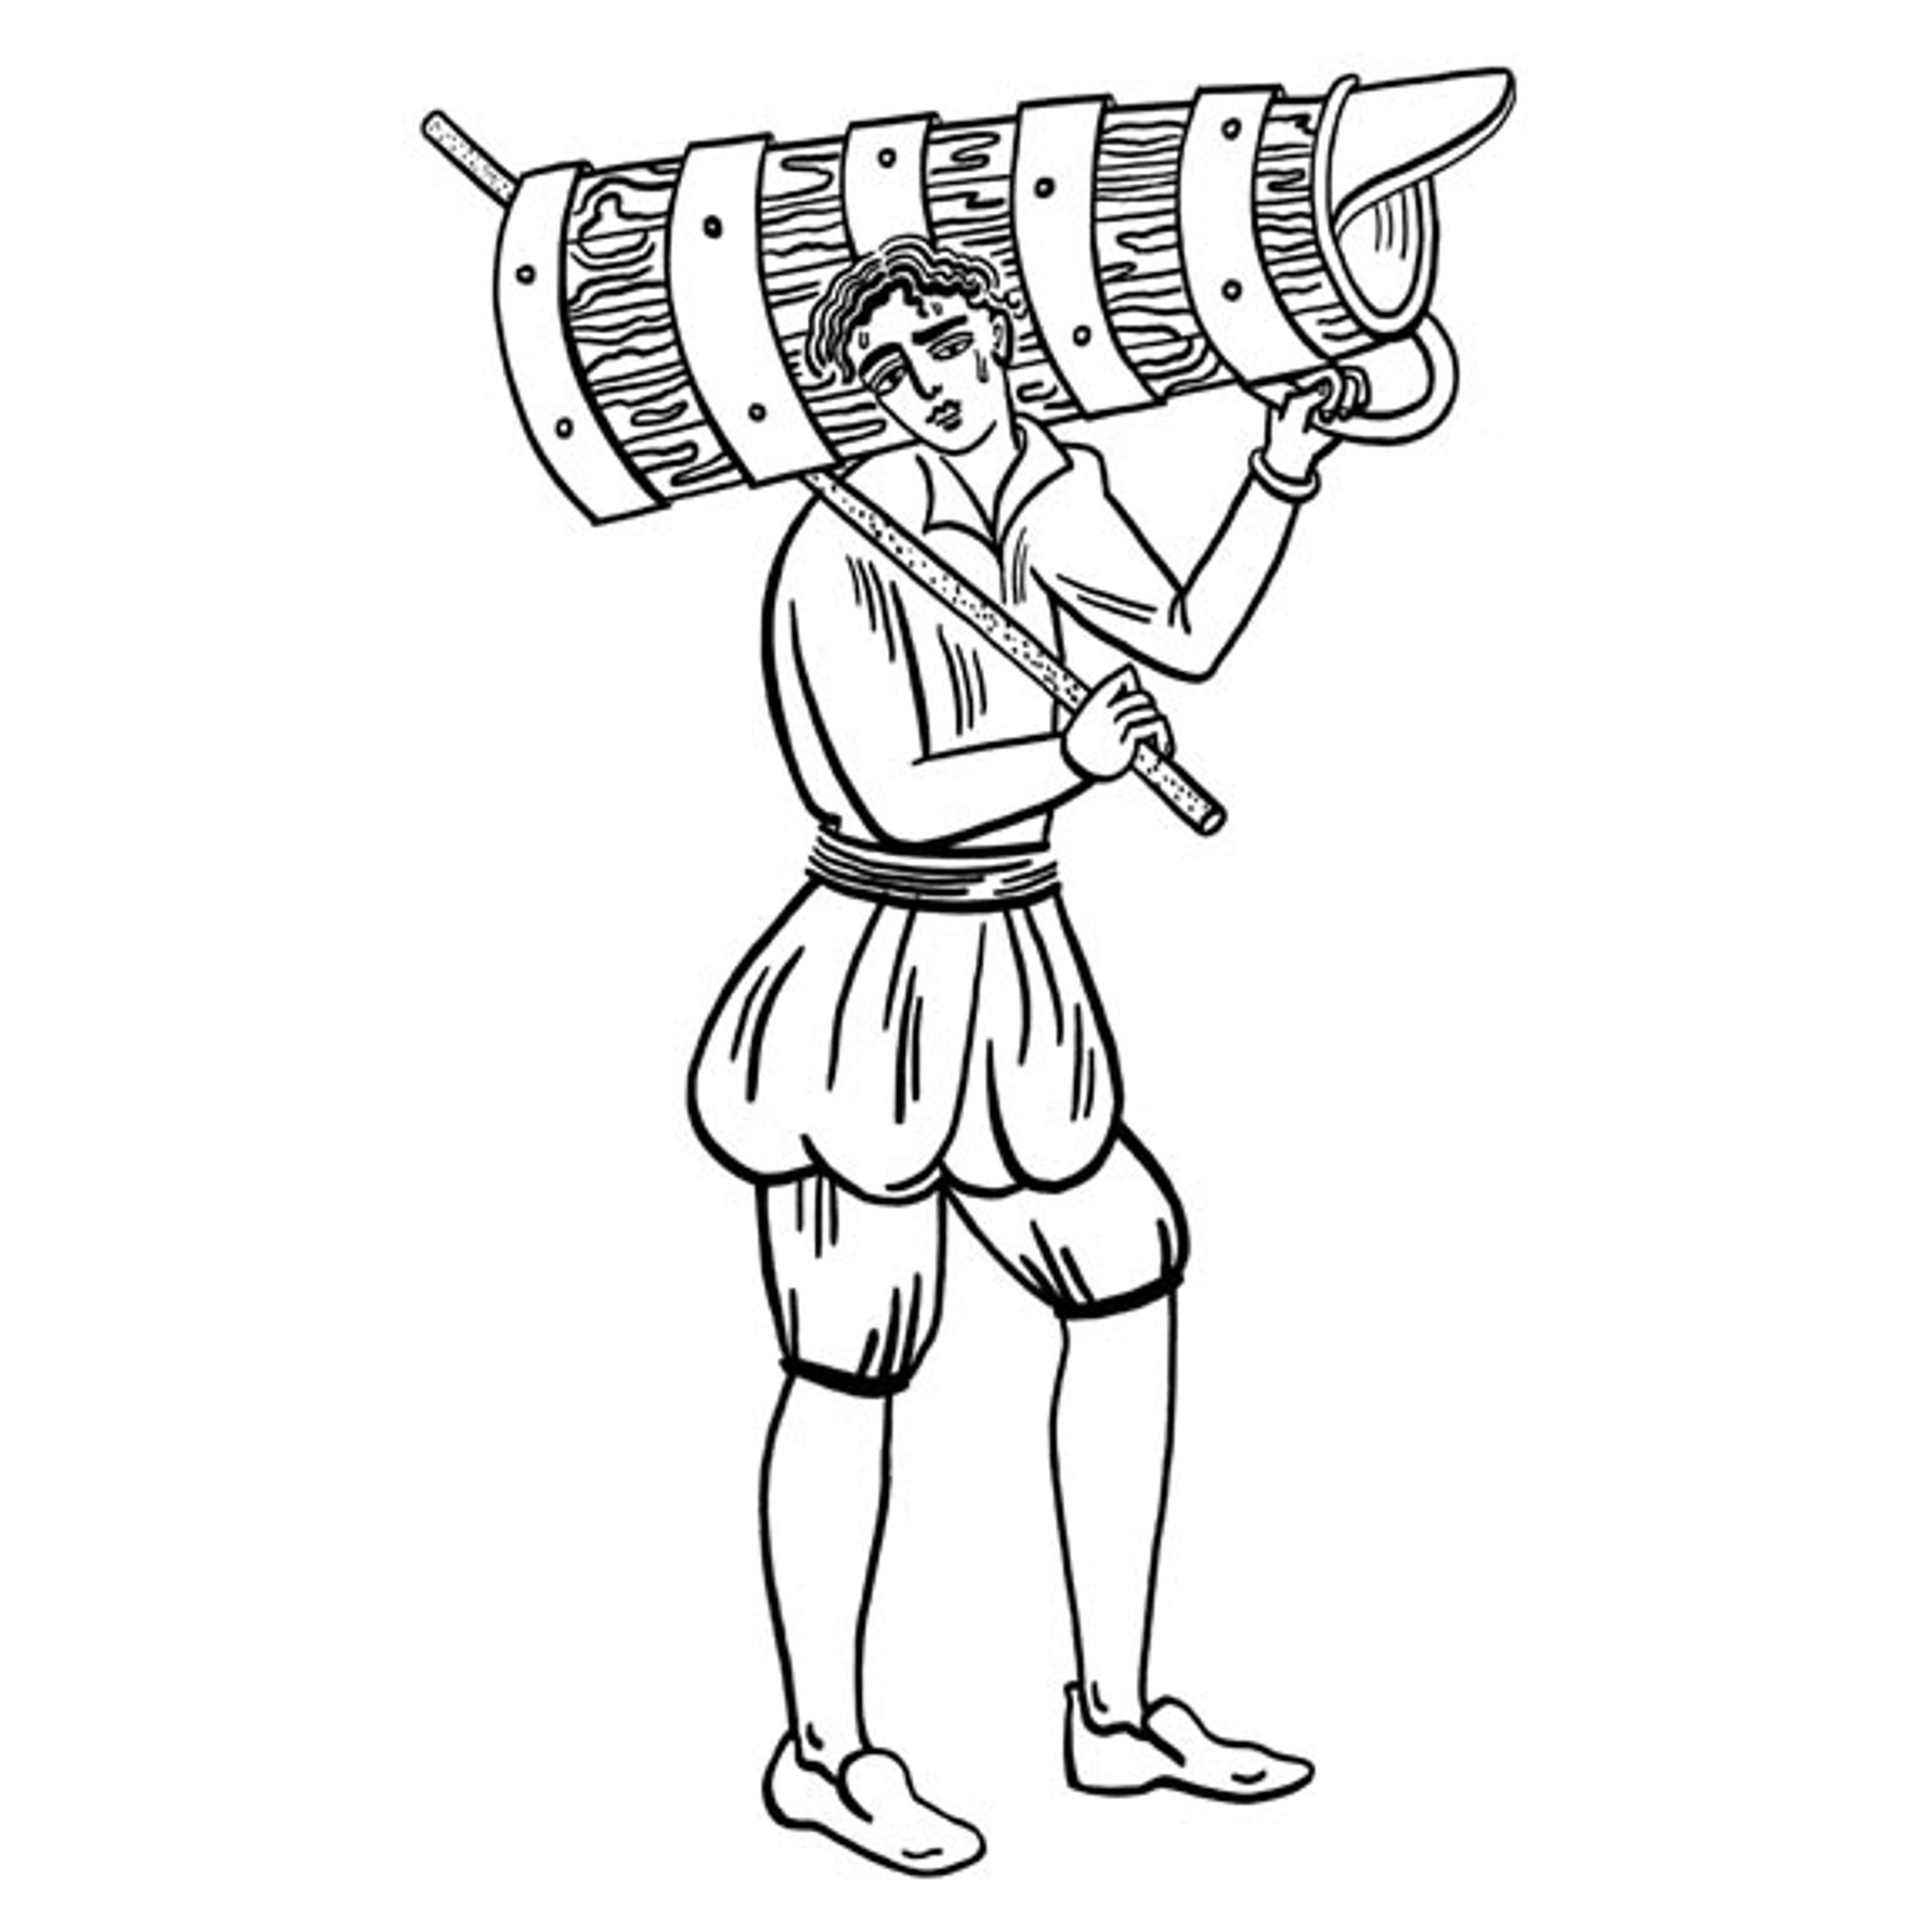 Illustrated figure carrying a large water container.  